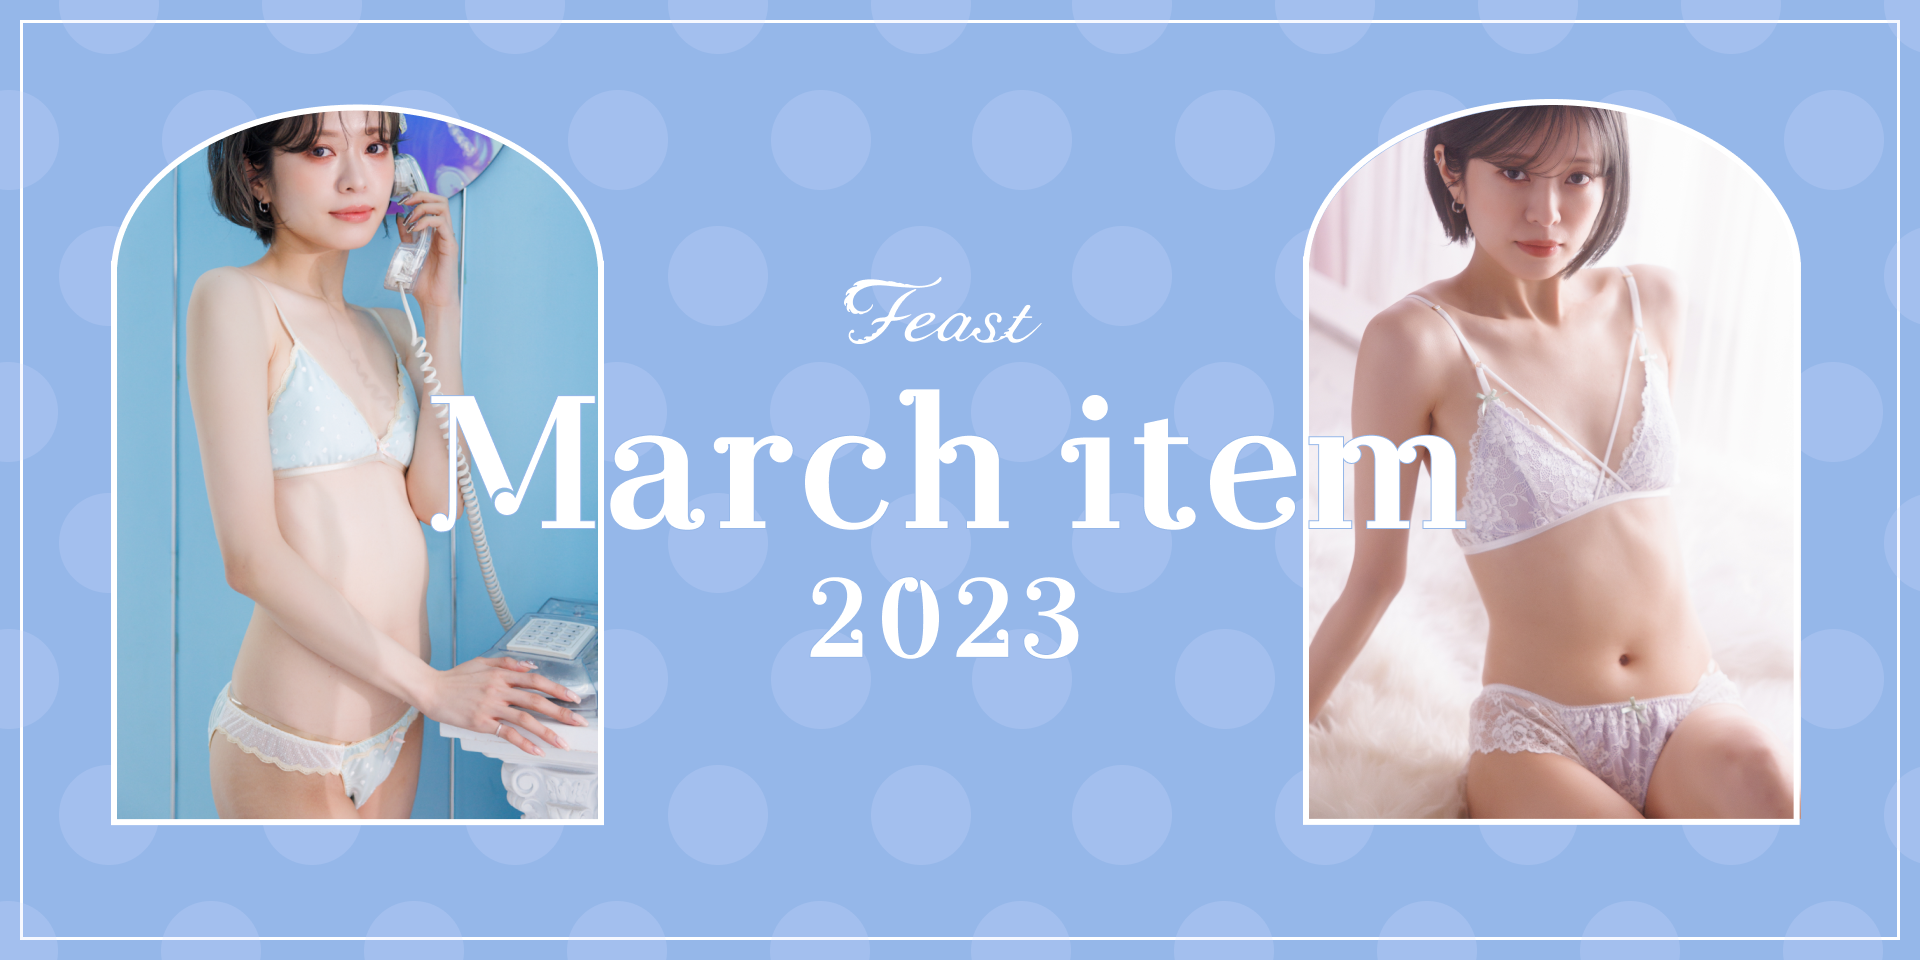 feast march item 2023